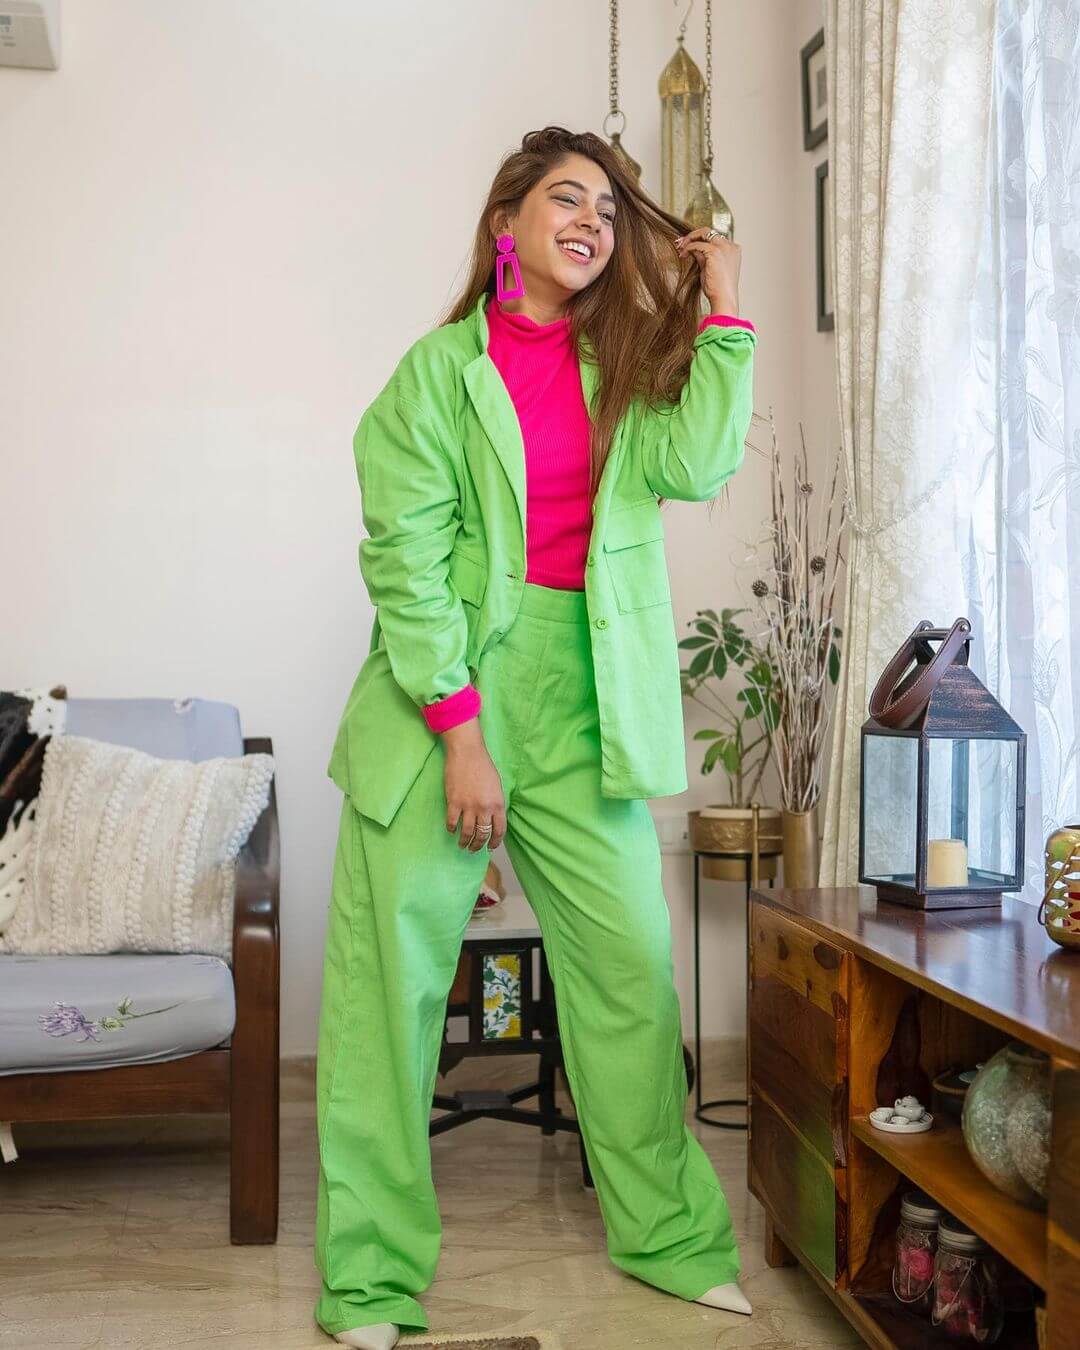 Niti Taylor Peppy Look In Green Two Piece With Neon Pink Turtle Neck Top